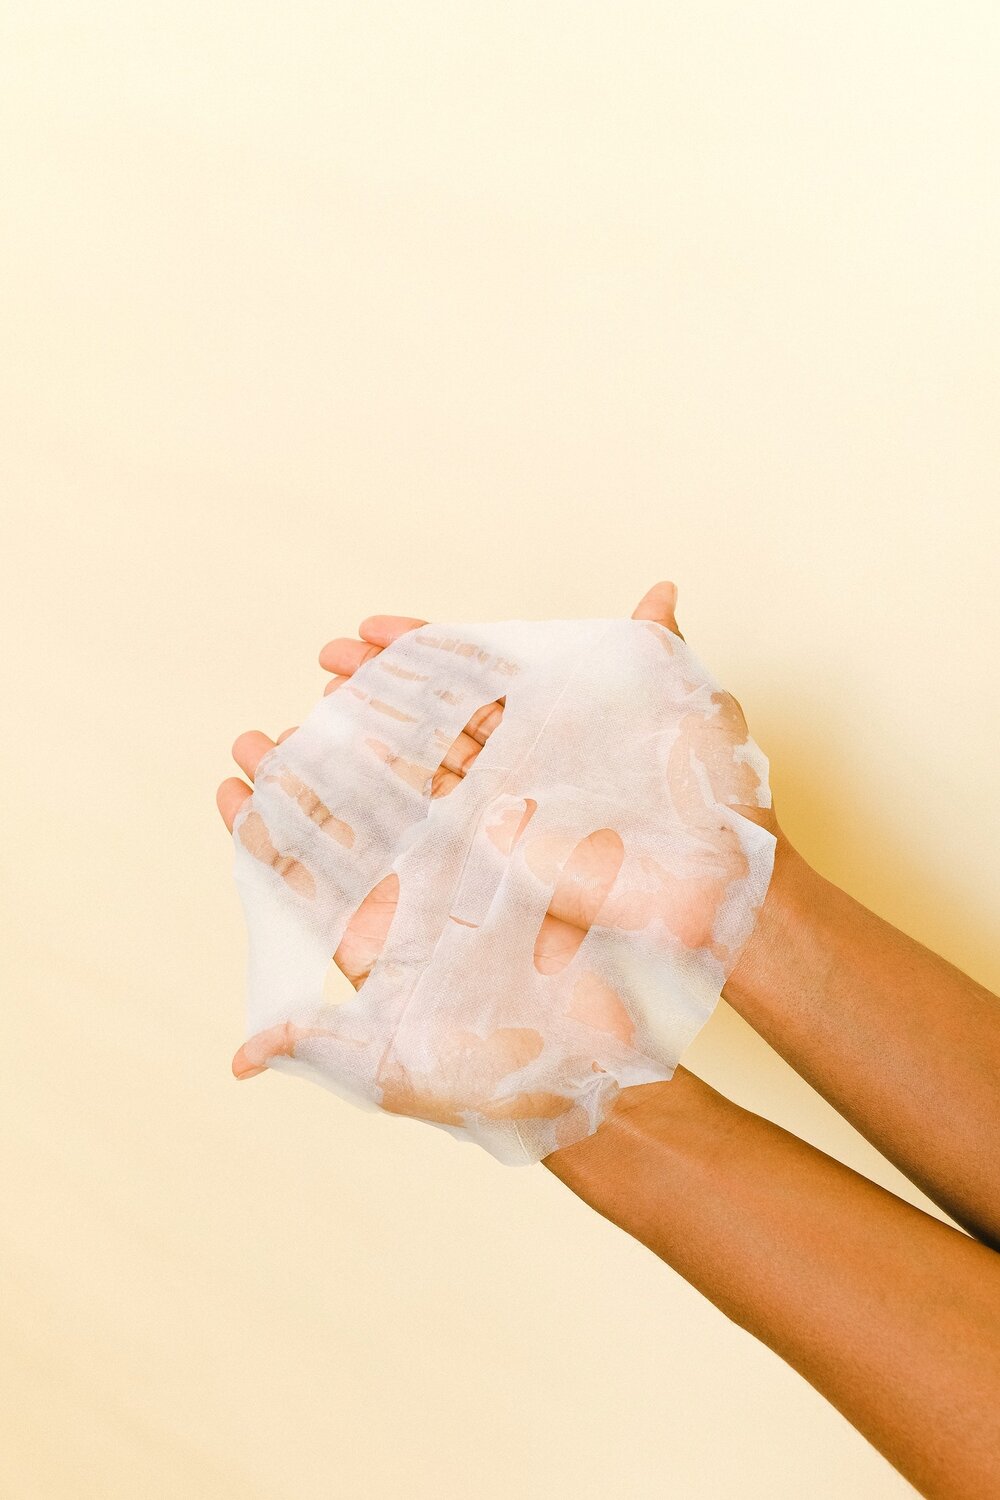 Photo of person holding a sheet mask for skincare on mellow yellow background by Anna Shvets from Pexels